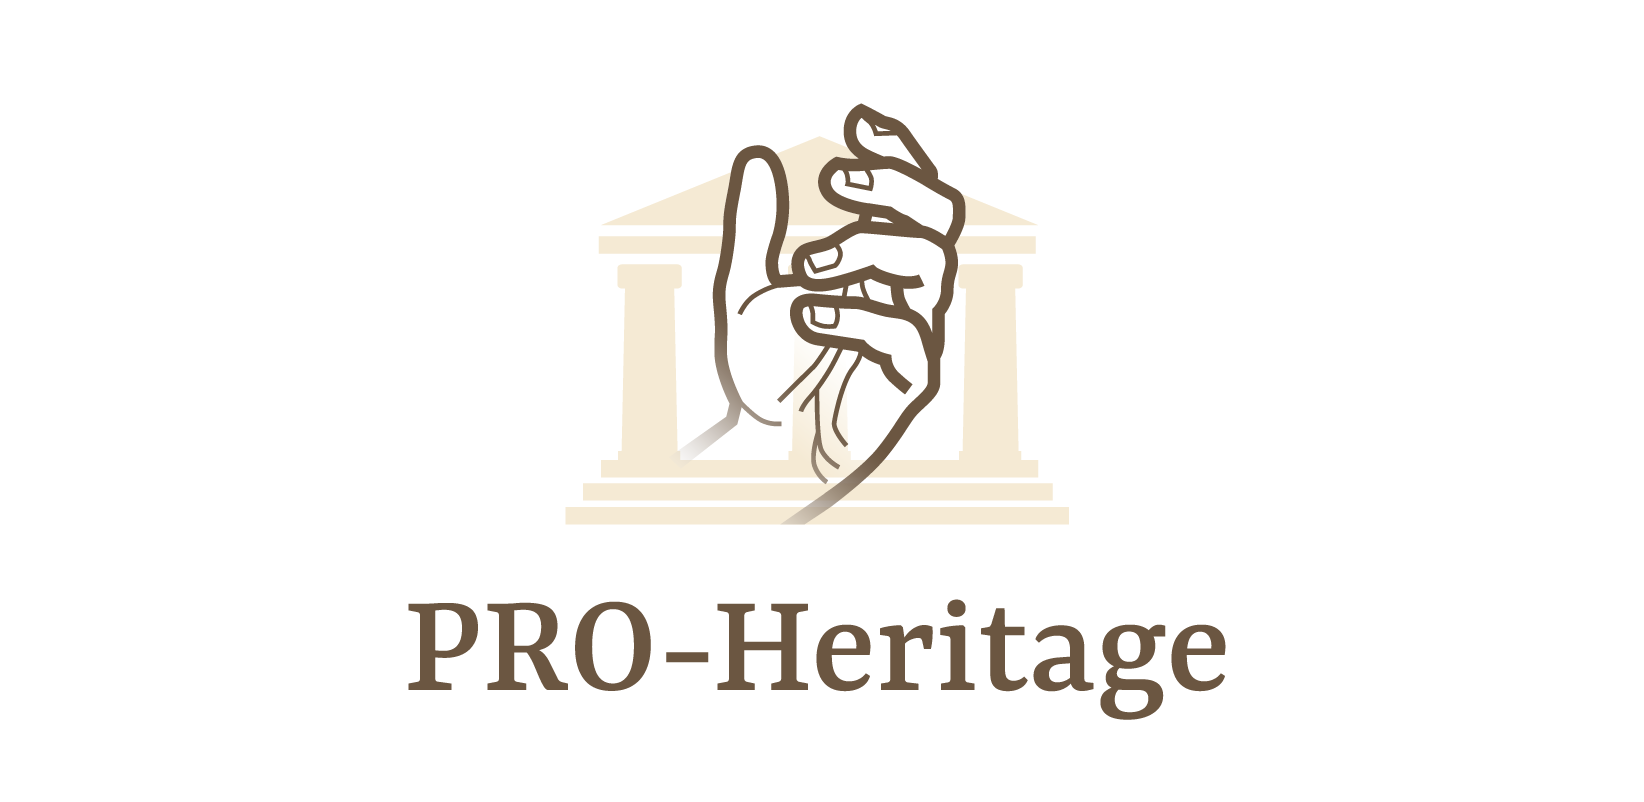 Energy Expert for Cultural Heritage